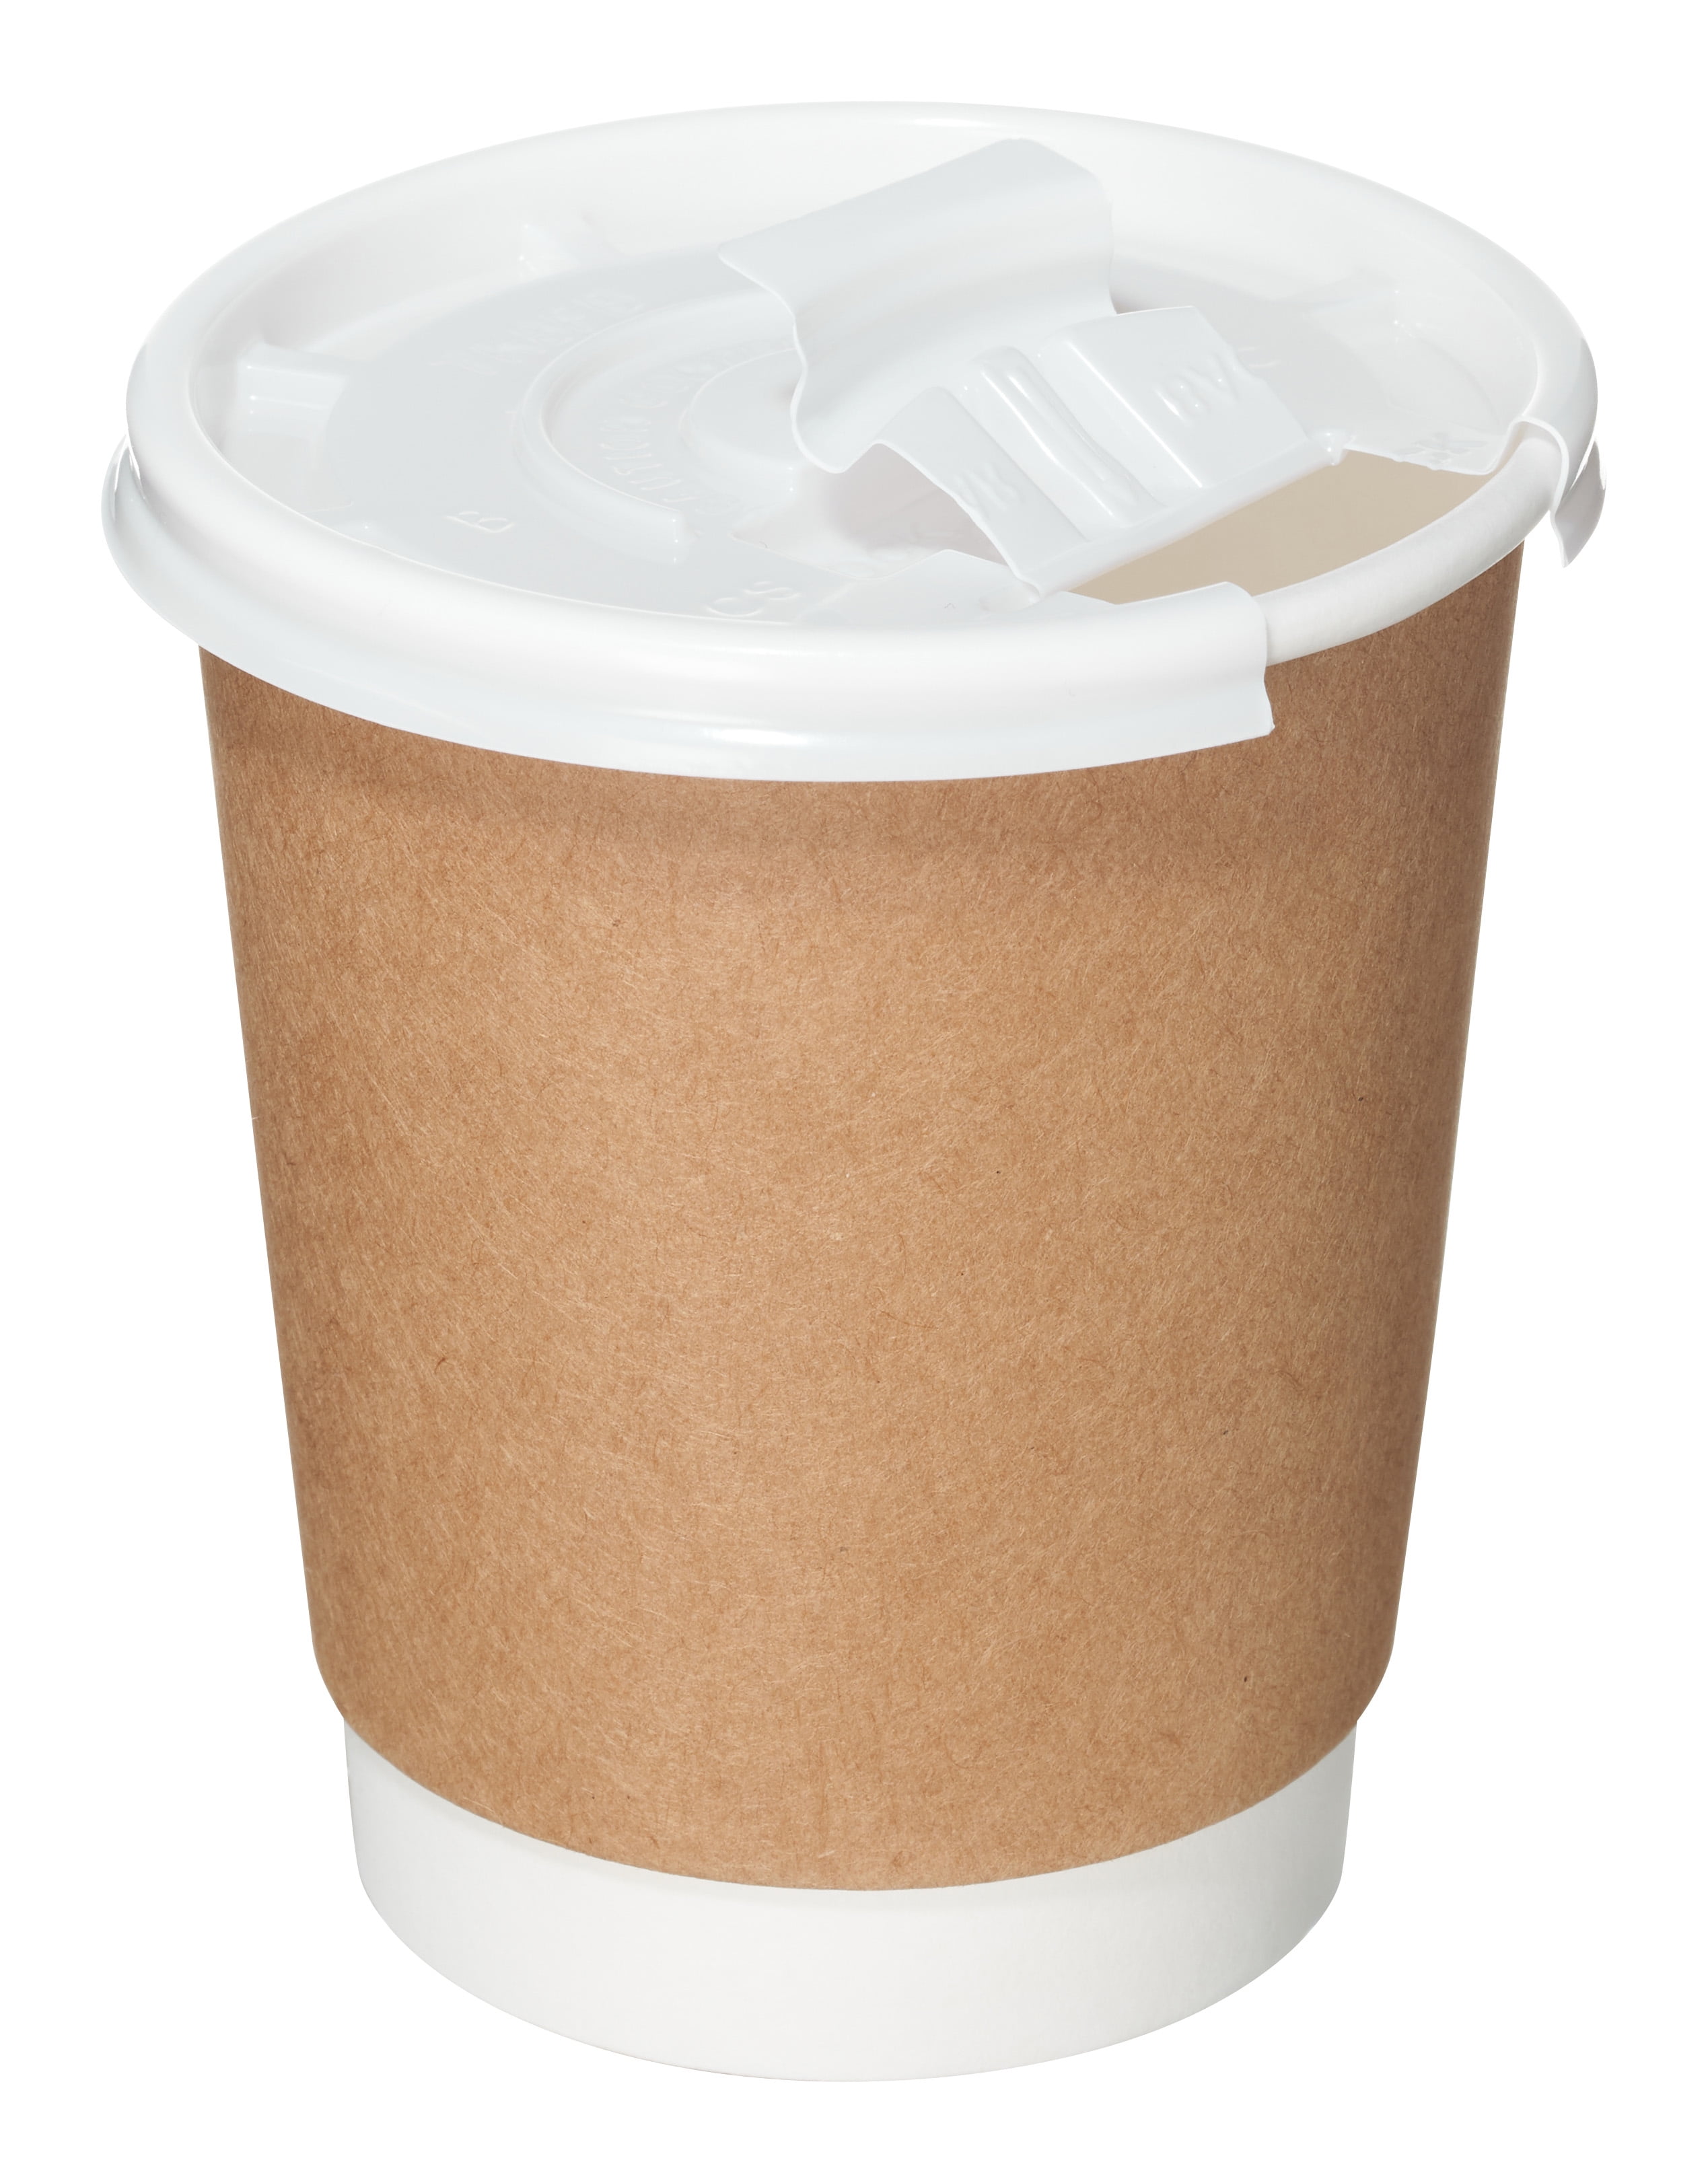 50 x Disposable Paper Coffee Cups and Lids.8 oz,12 0z,or16 0z. 8 oz 